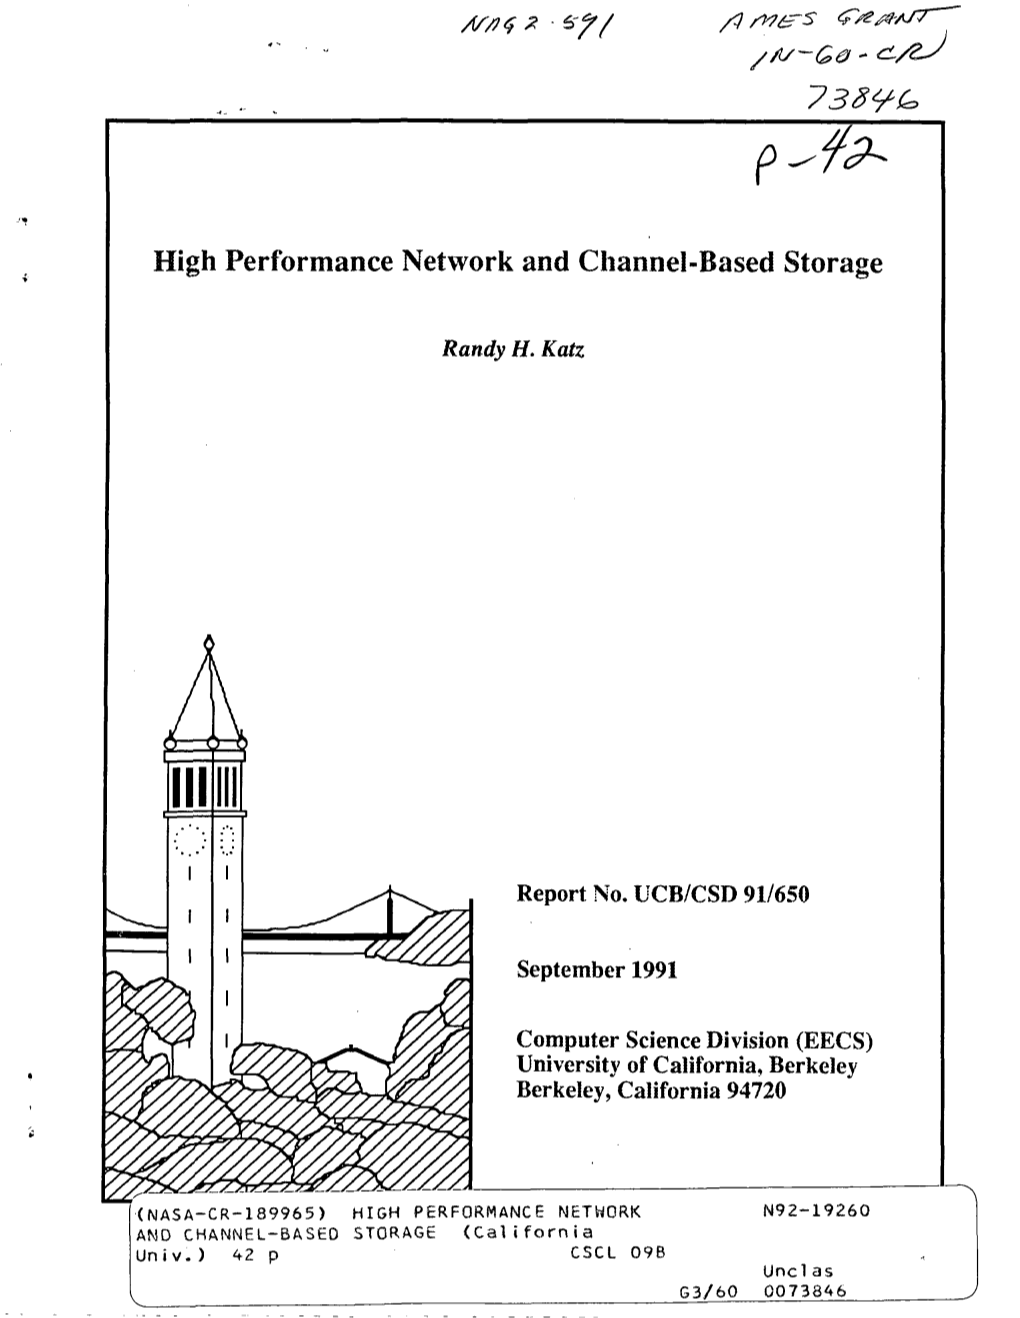 High Performance Network and Channel-Based Storage